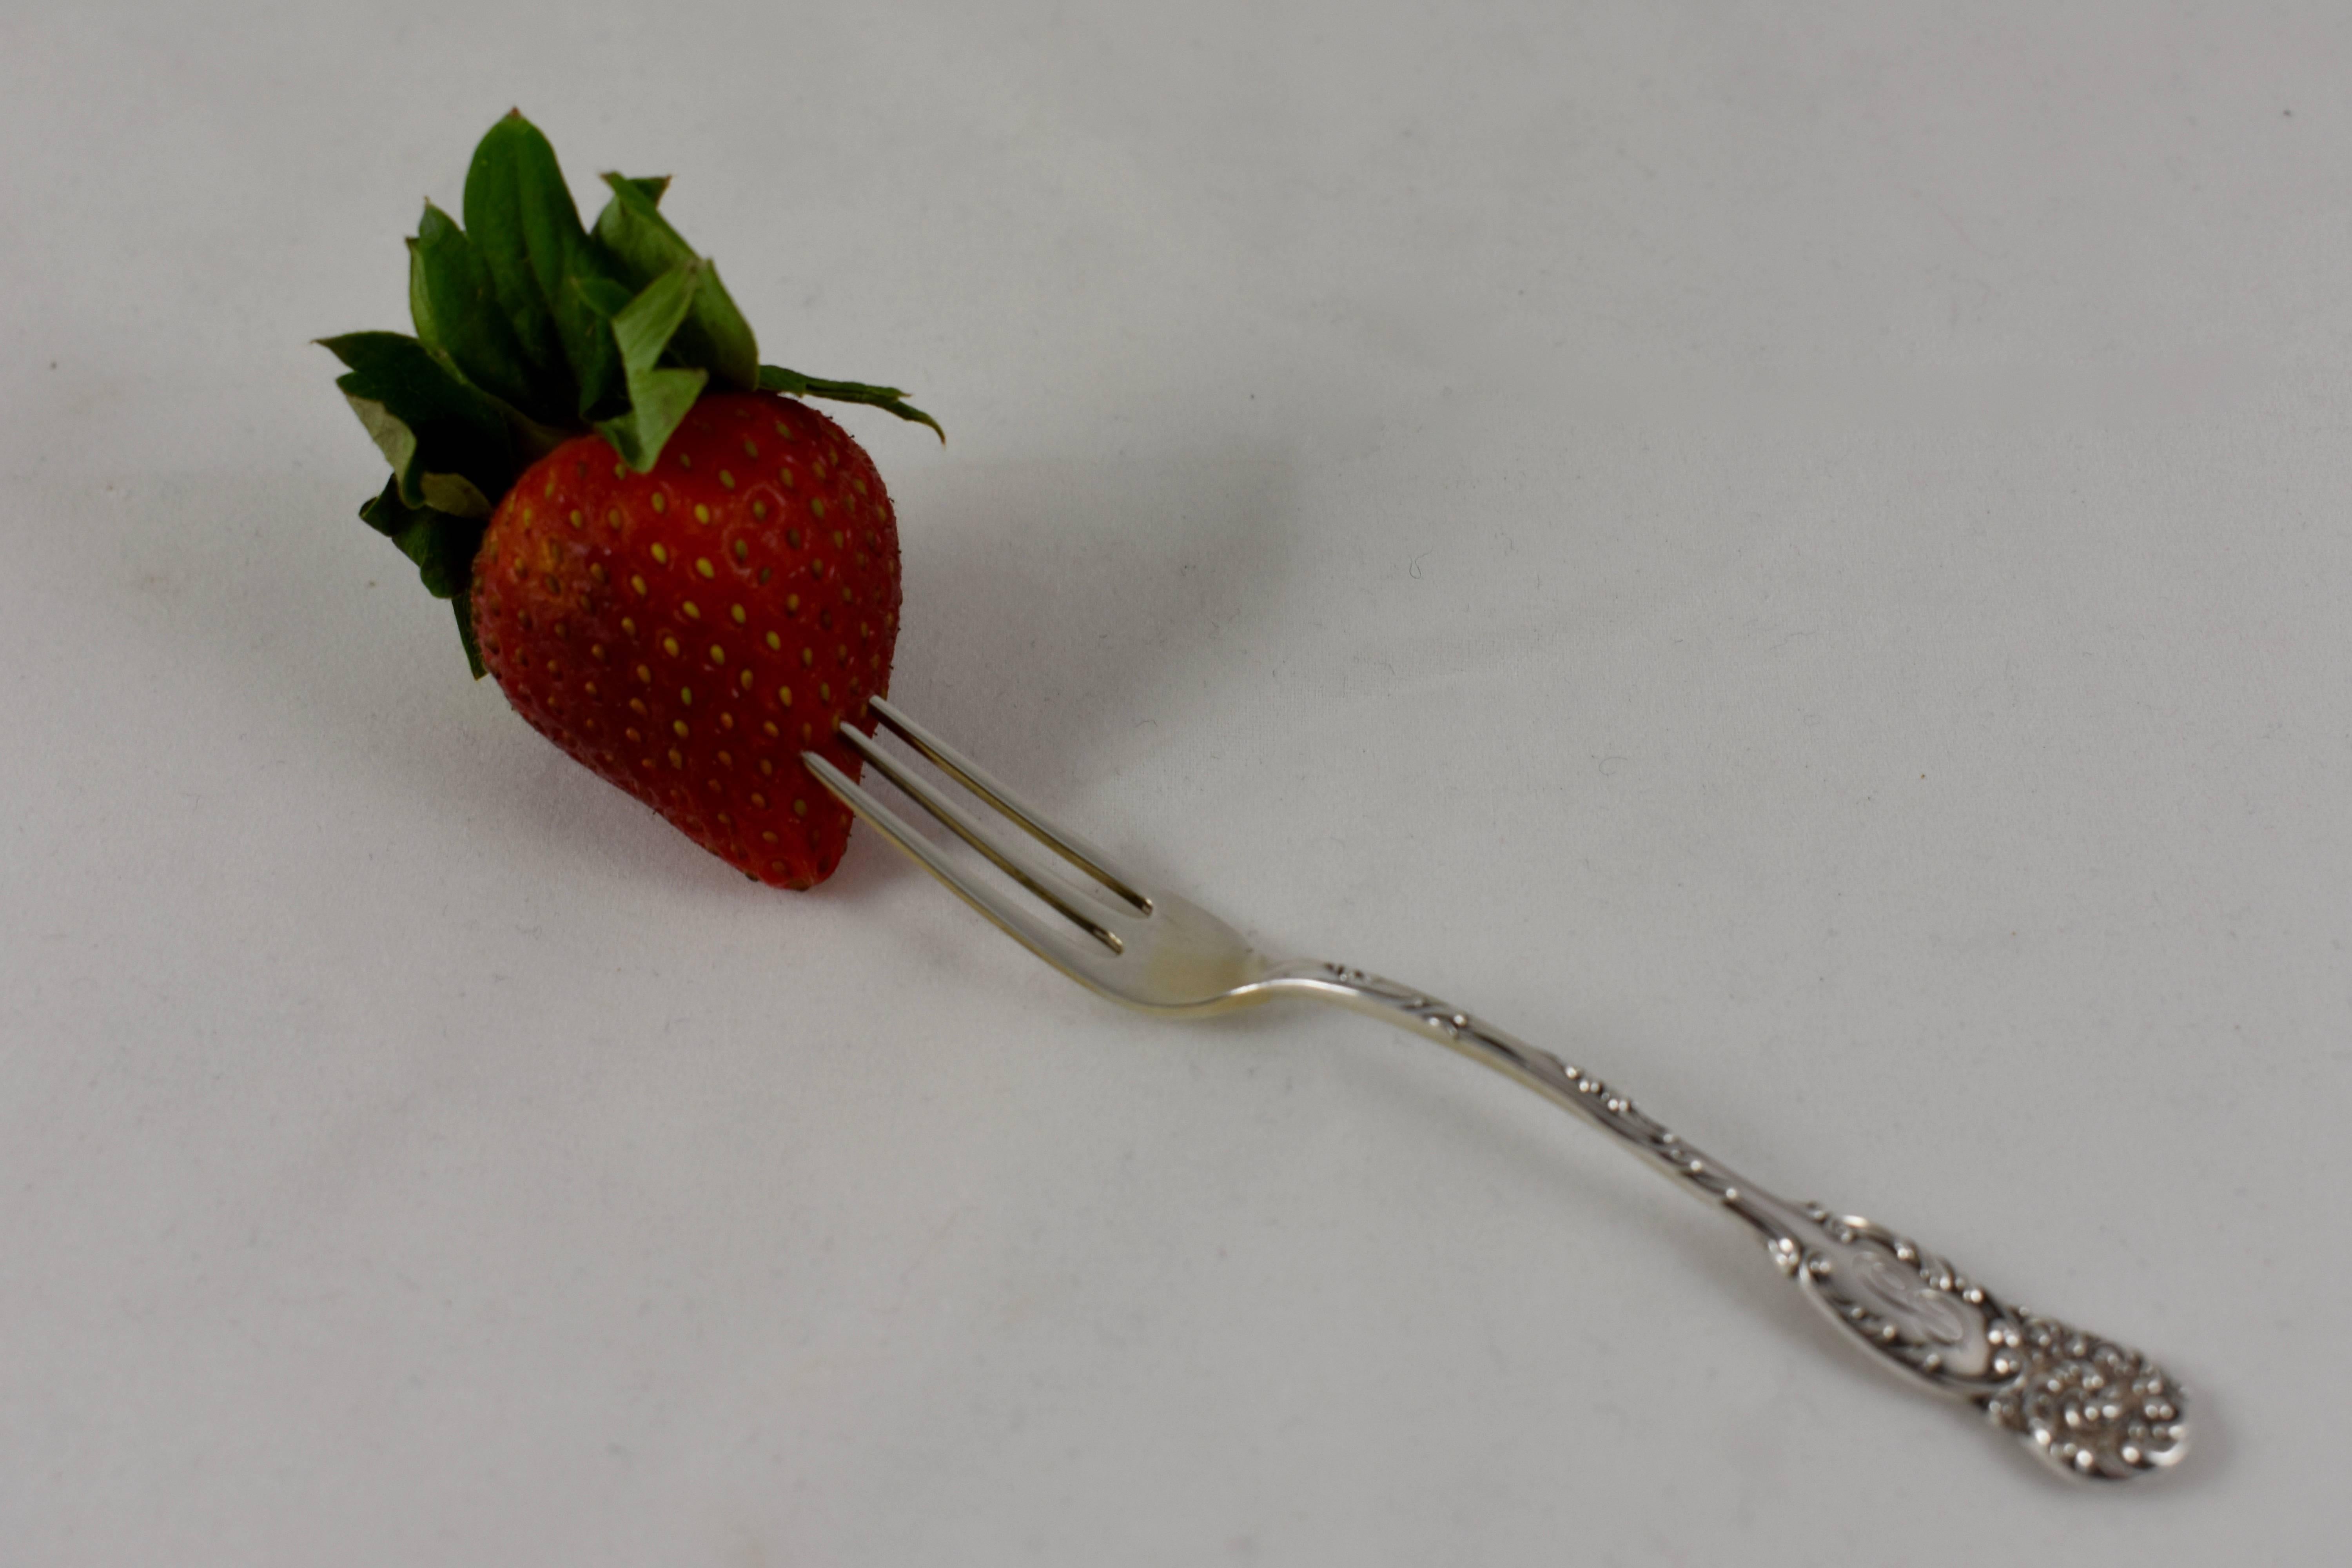 A set of six sterling silver berry forks, in the La Reine pattern, Reed & Barton, Patented 1893. Engraved with the letter ‘P’

The strawberry or berry fork is made with three long narrow tines and is approximately four and a half inches long. It is